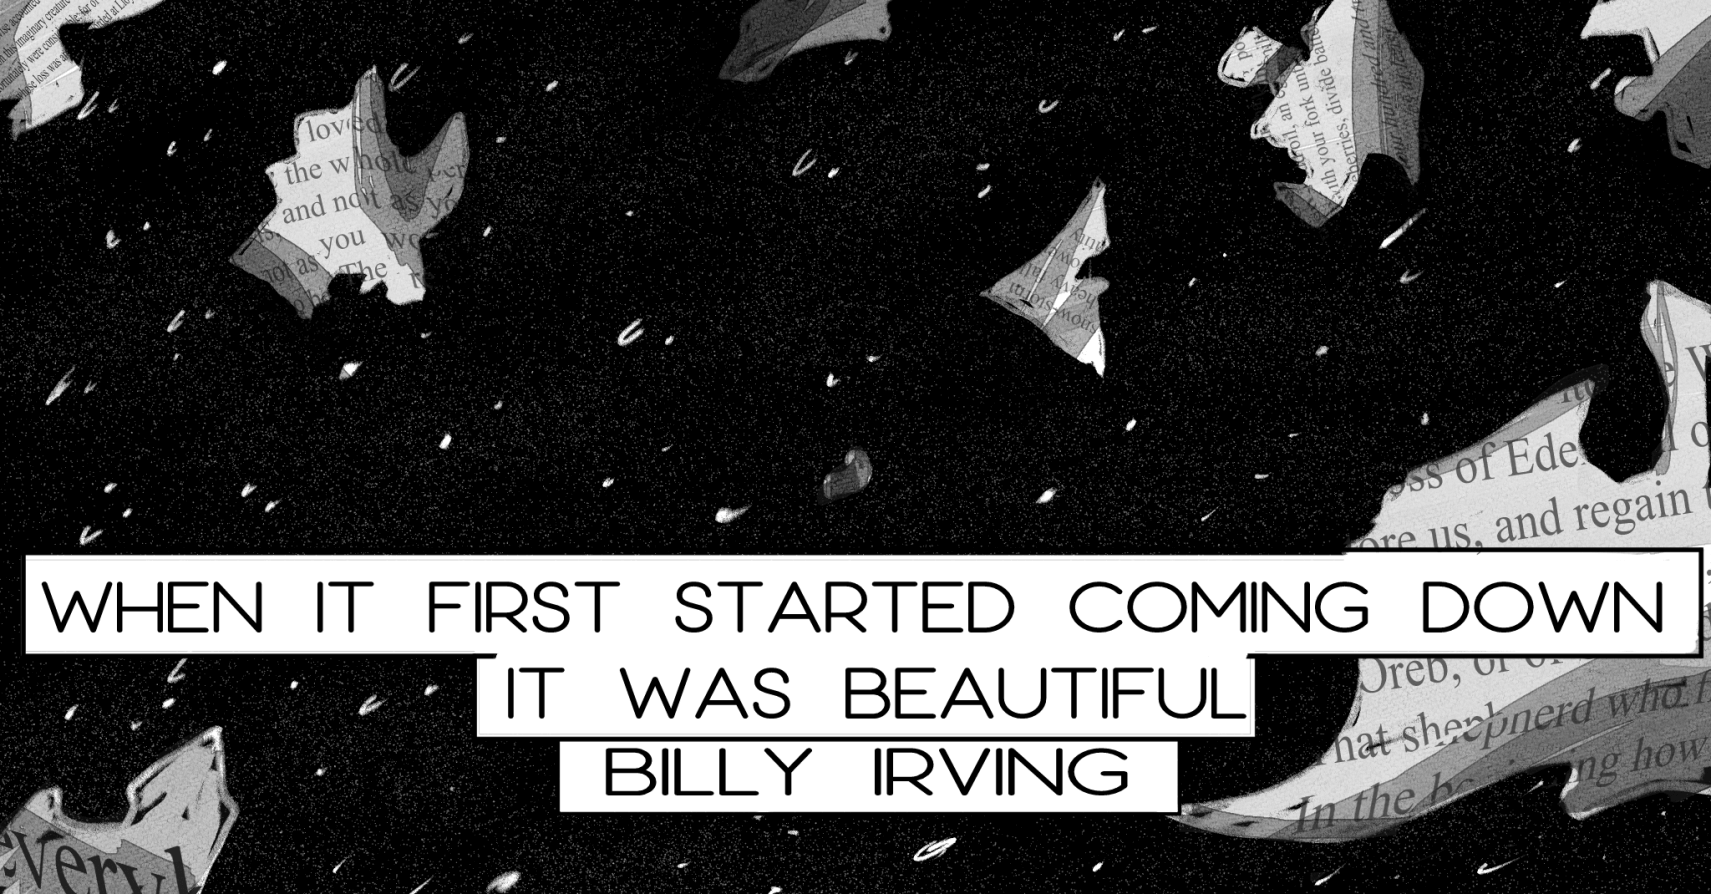 WHEN IT FIRST STARTED COMING DOWN IT WAS BEAUTIFUL by Billy Irving